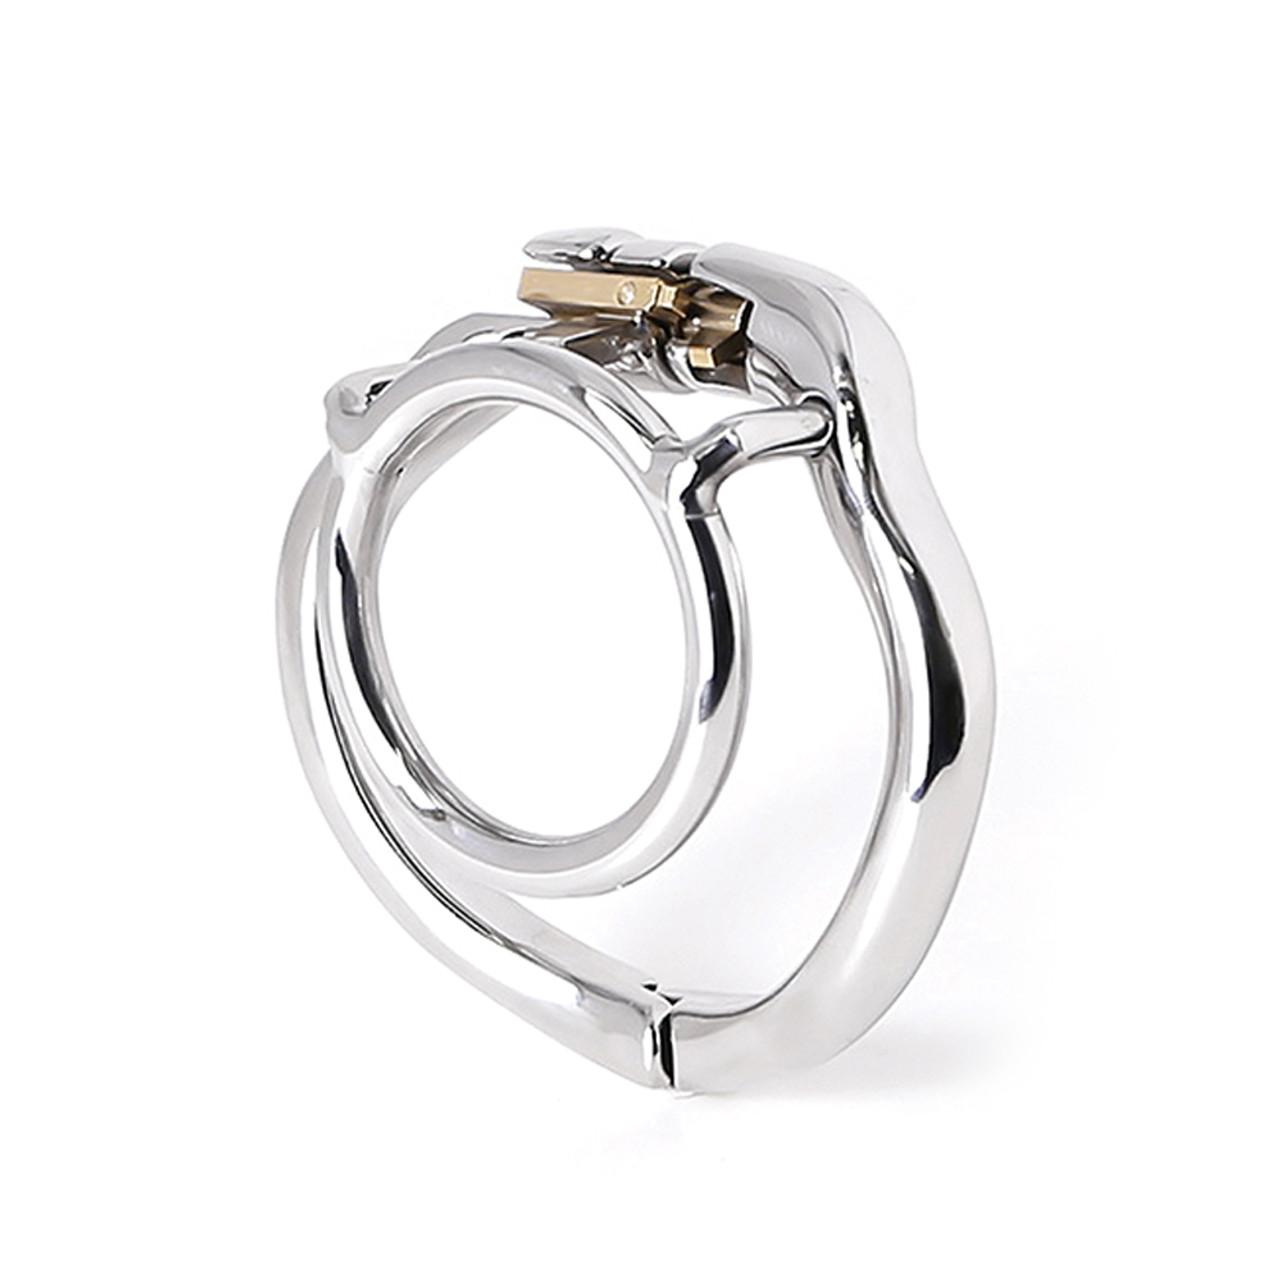 Buy the Locking Stainless Steel Hinged Cock Ring Chastity Cage photo